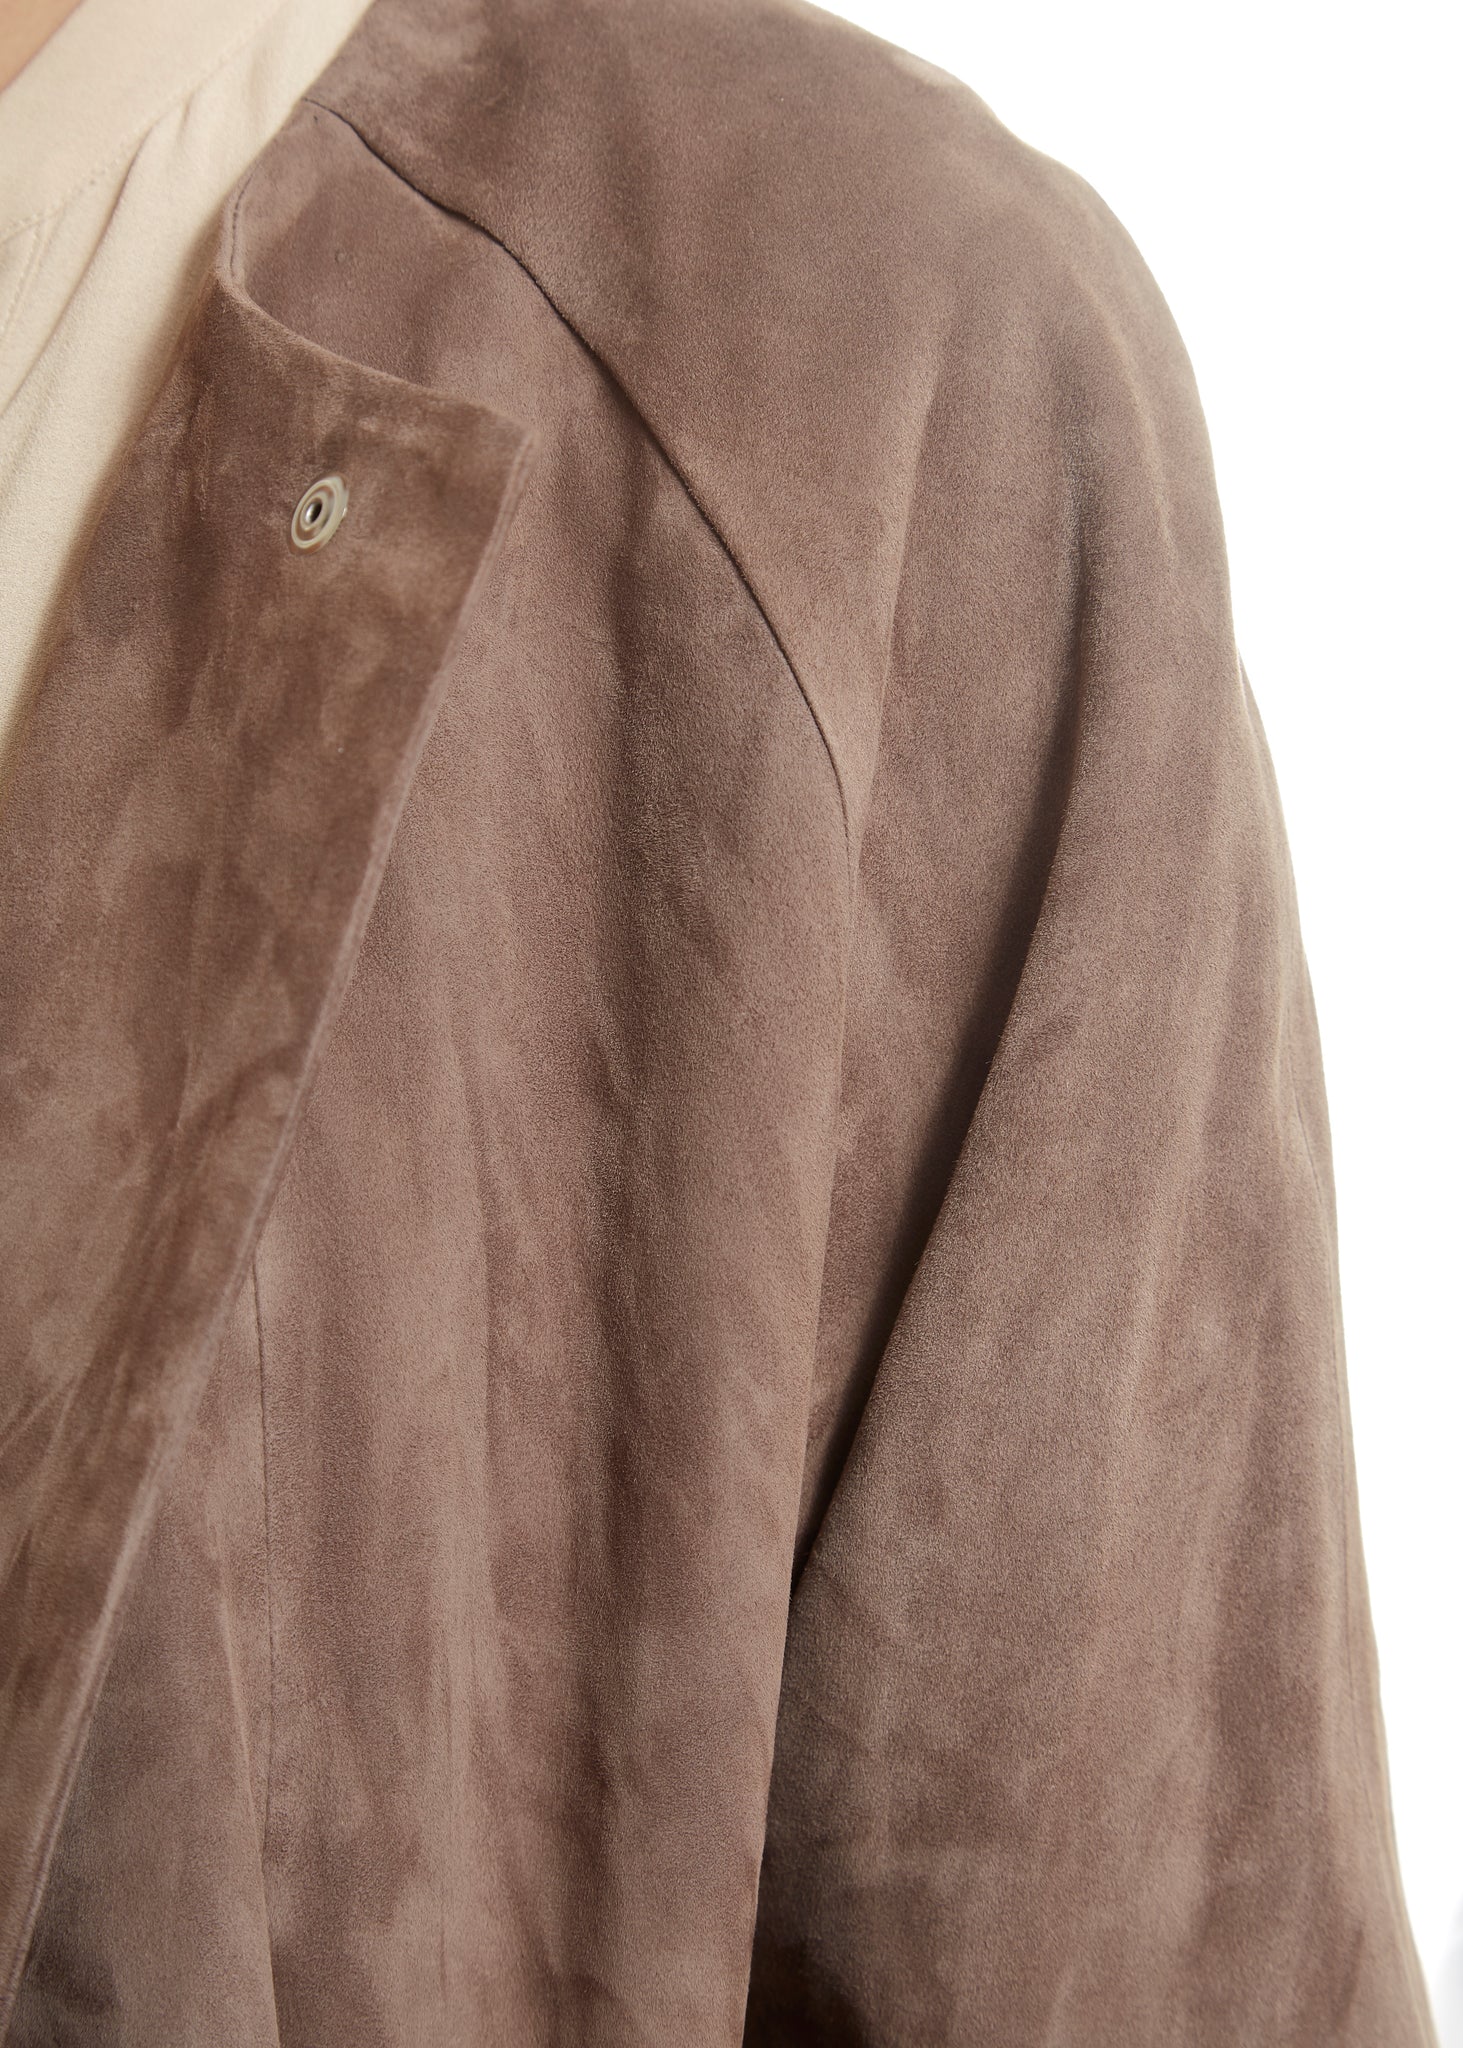 Long Taupe Suede Belted Coat - Jessimara